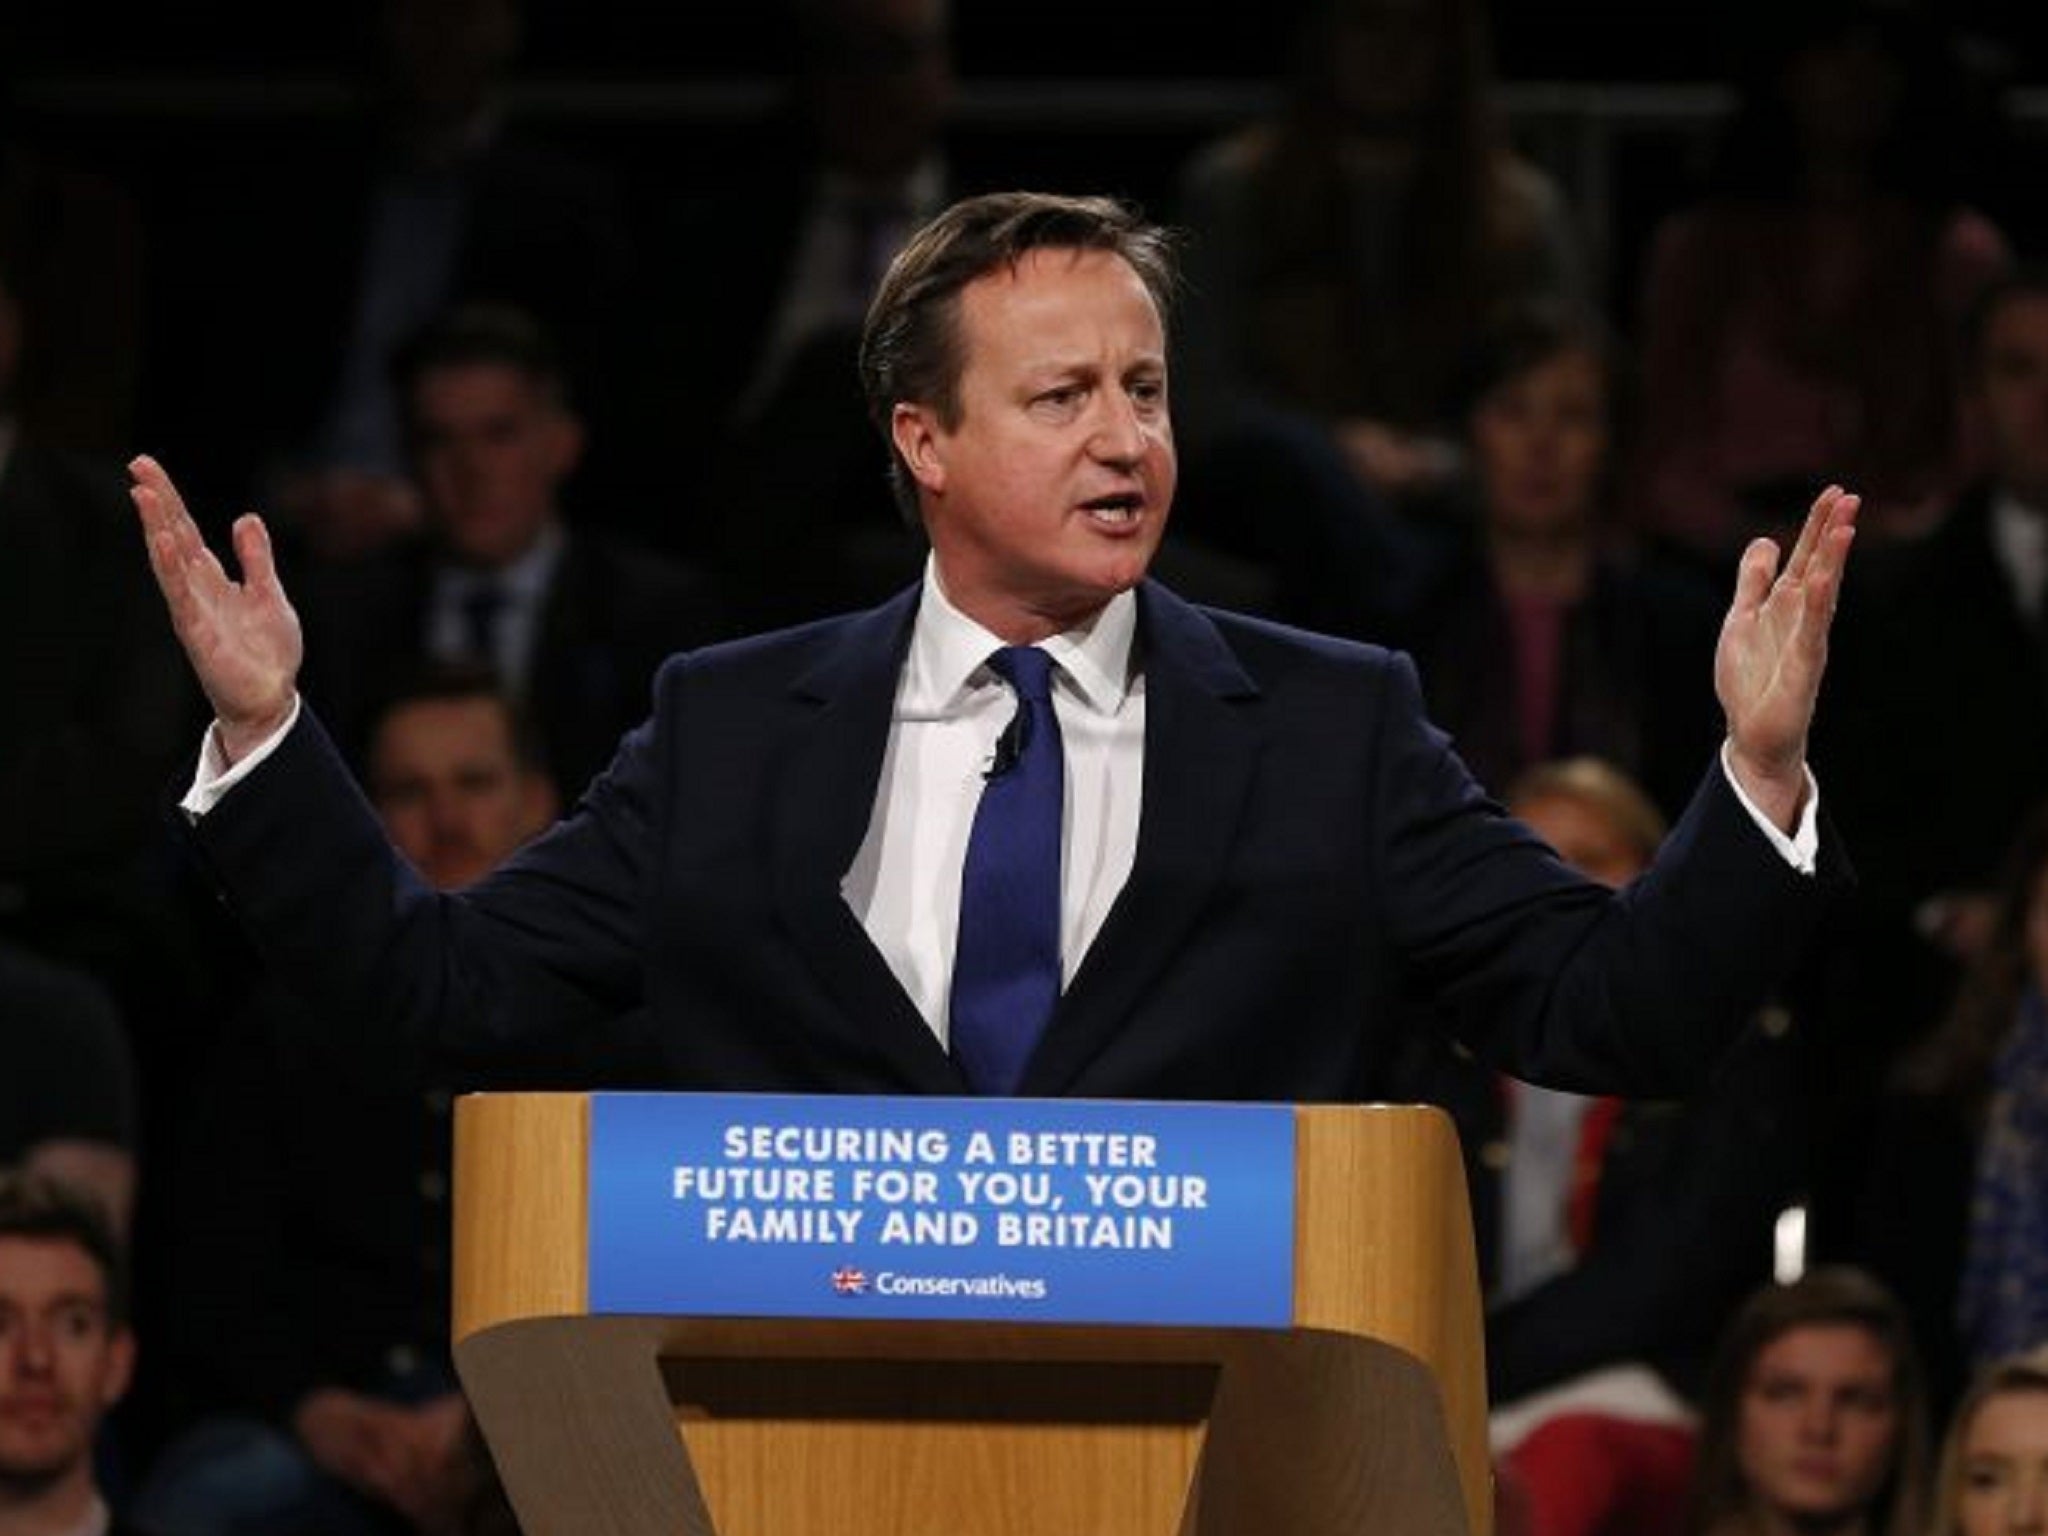 David Cameron talking to the Conservative Party Spring Conference in Manchester